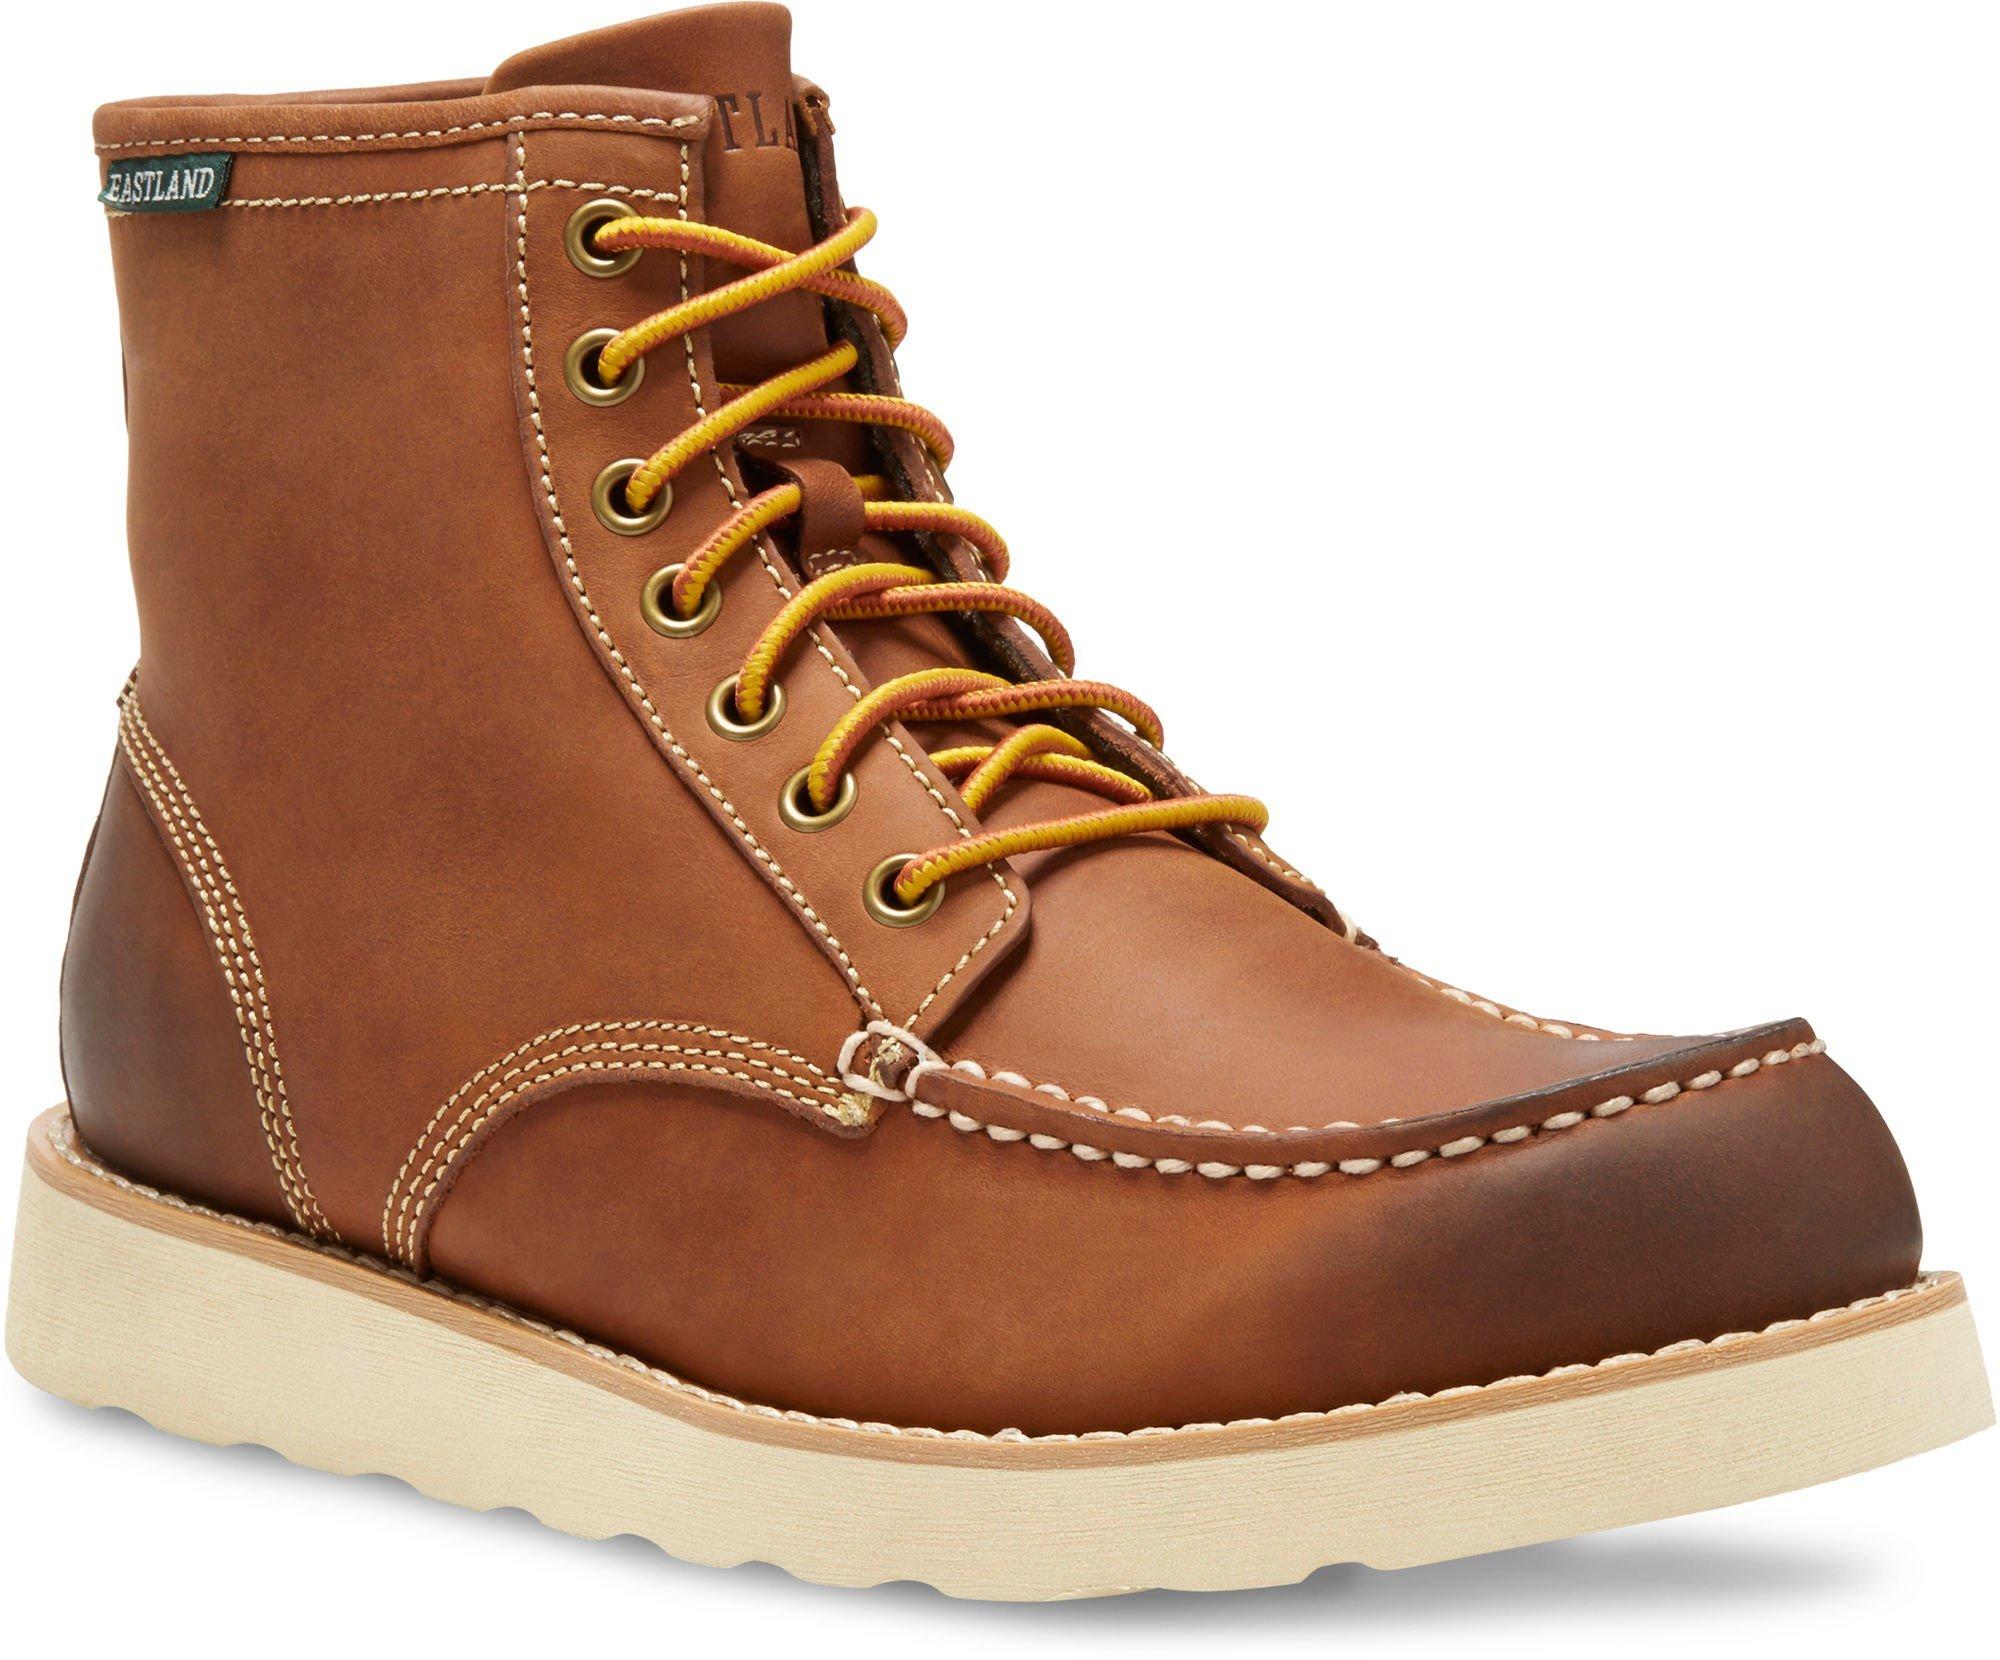 Mens Lumber Up Boots